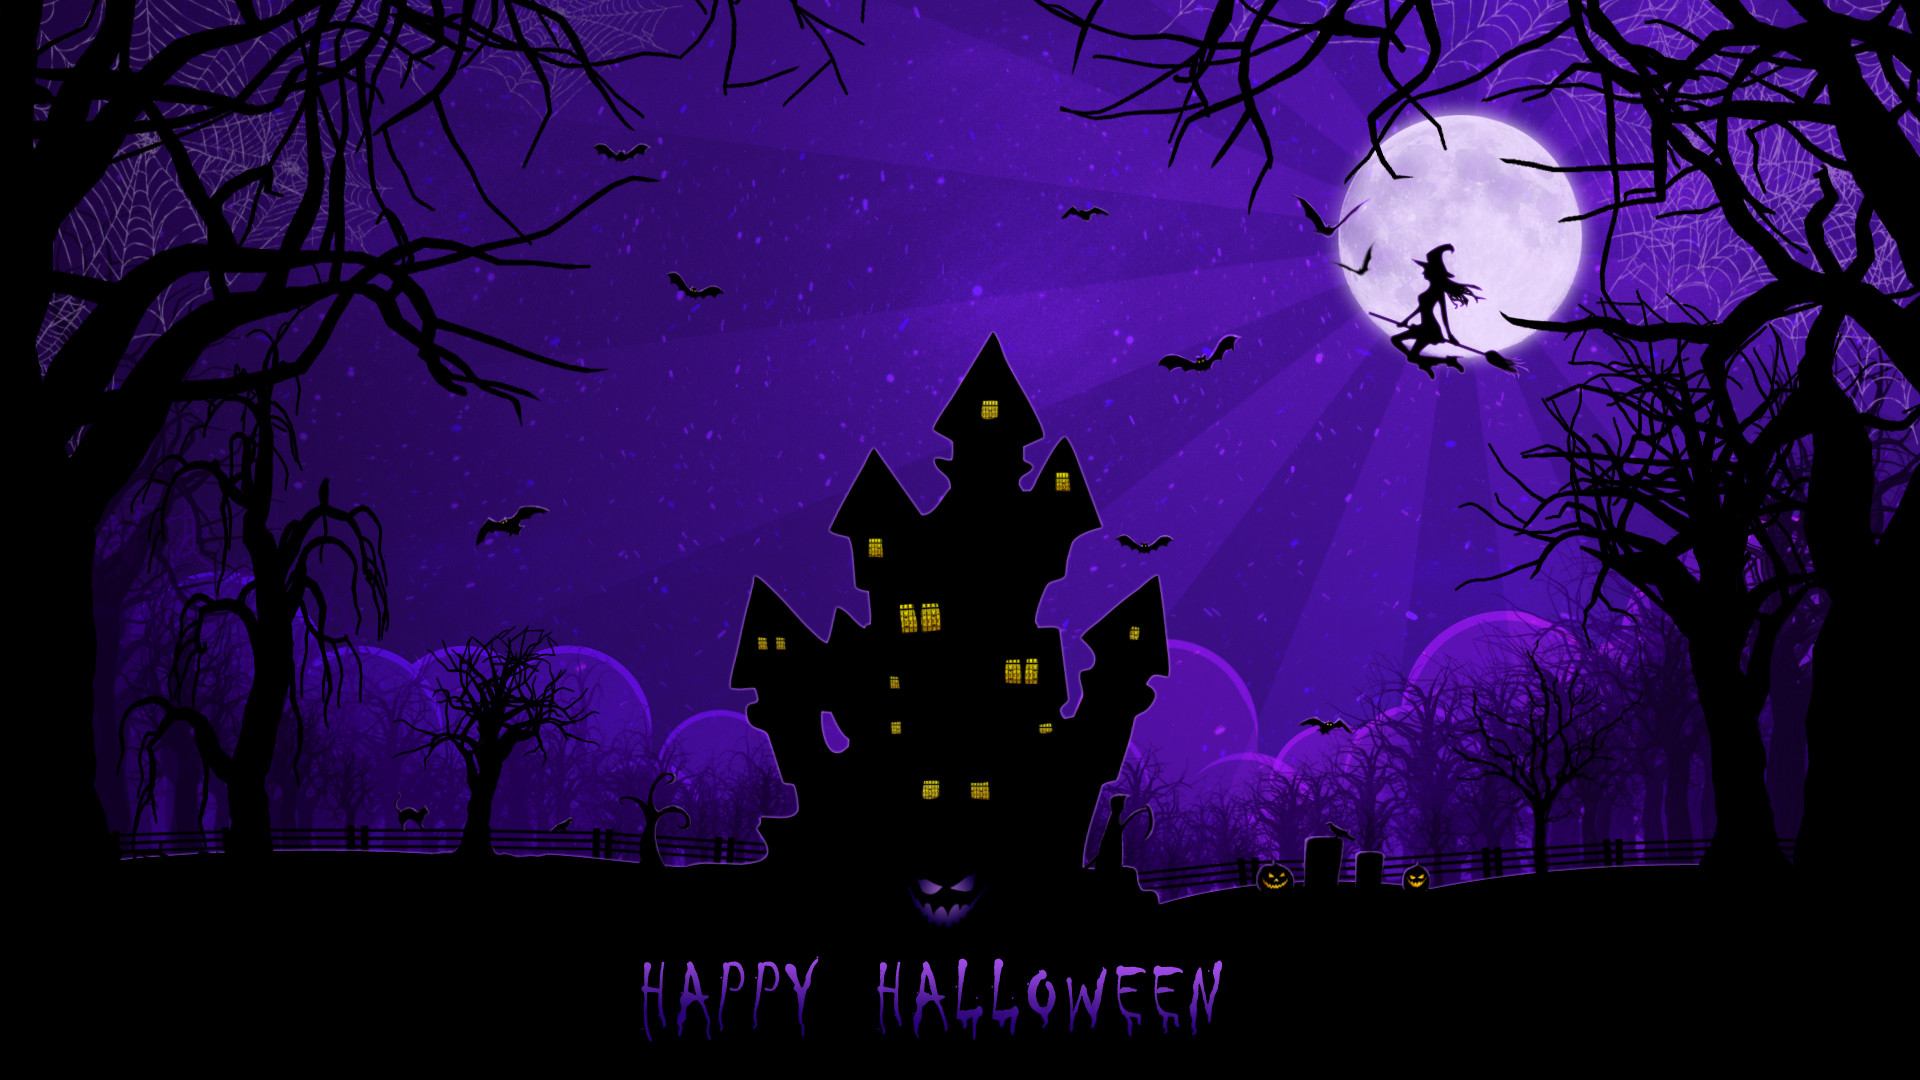 1920x1080 Full Size of Halloween: Halloween Tumblr Backgrounds Excelent Image  Inspirations 2560x1440: ...